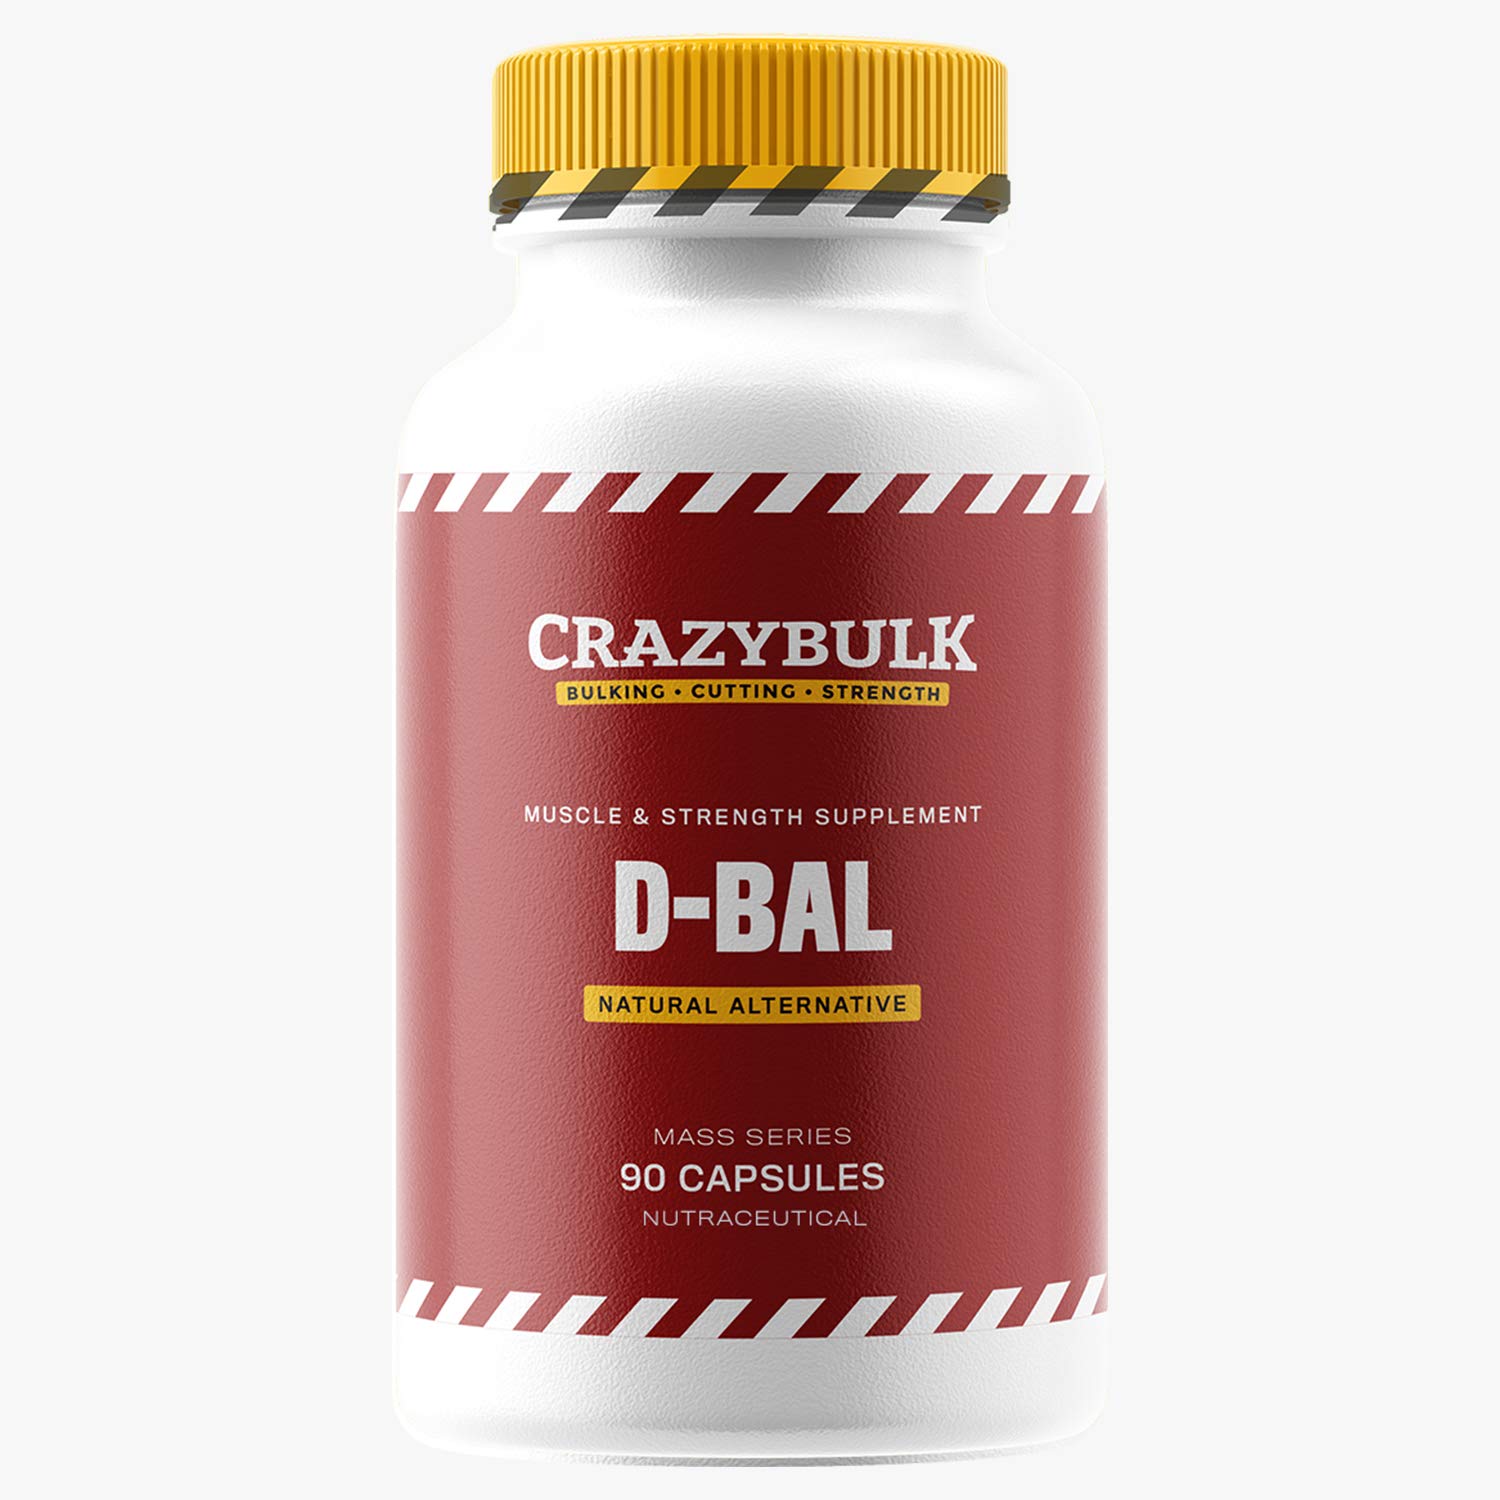 dbal - Does Dianabol Make You Angry?